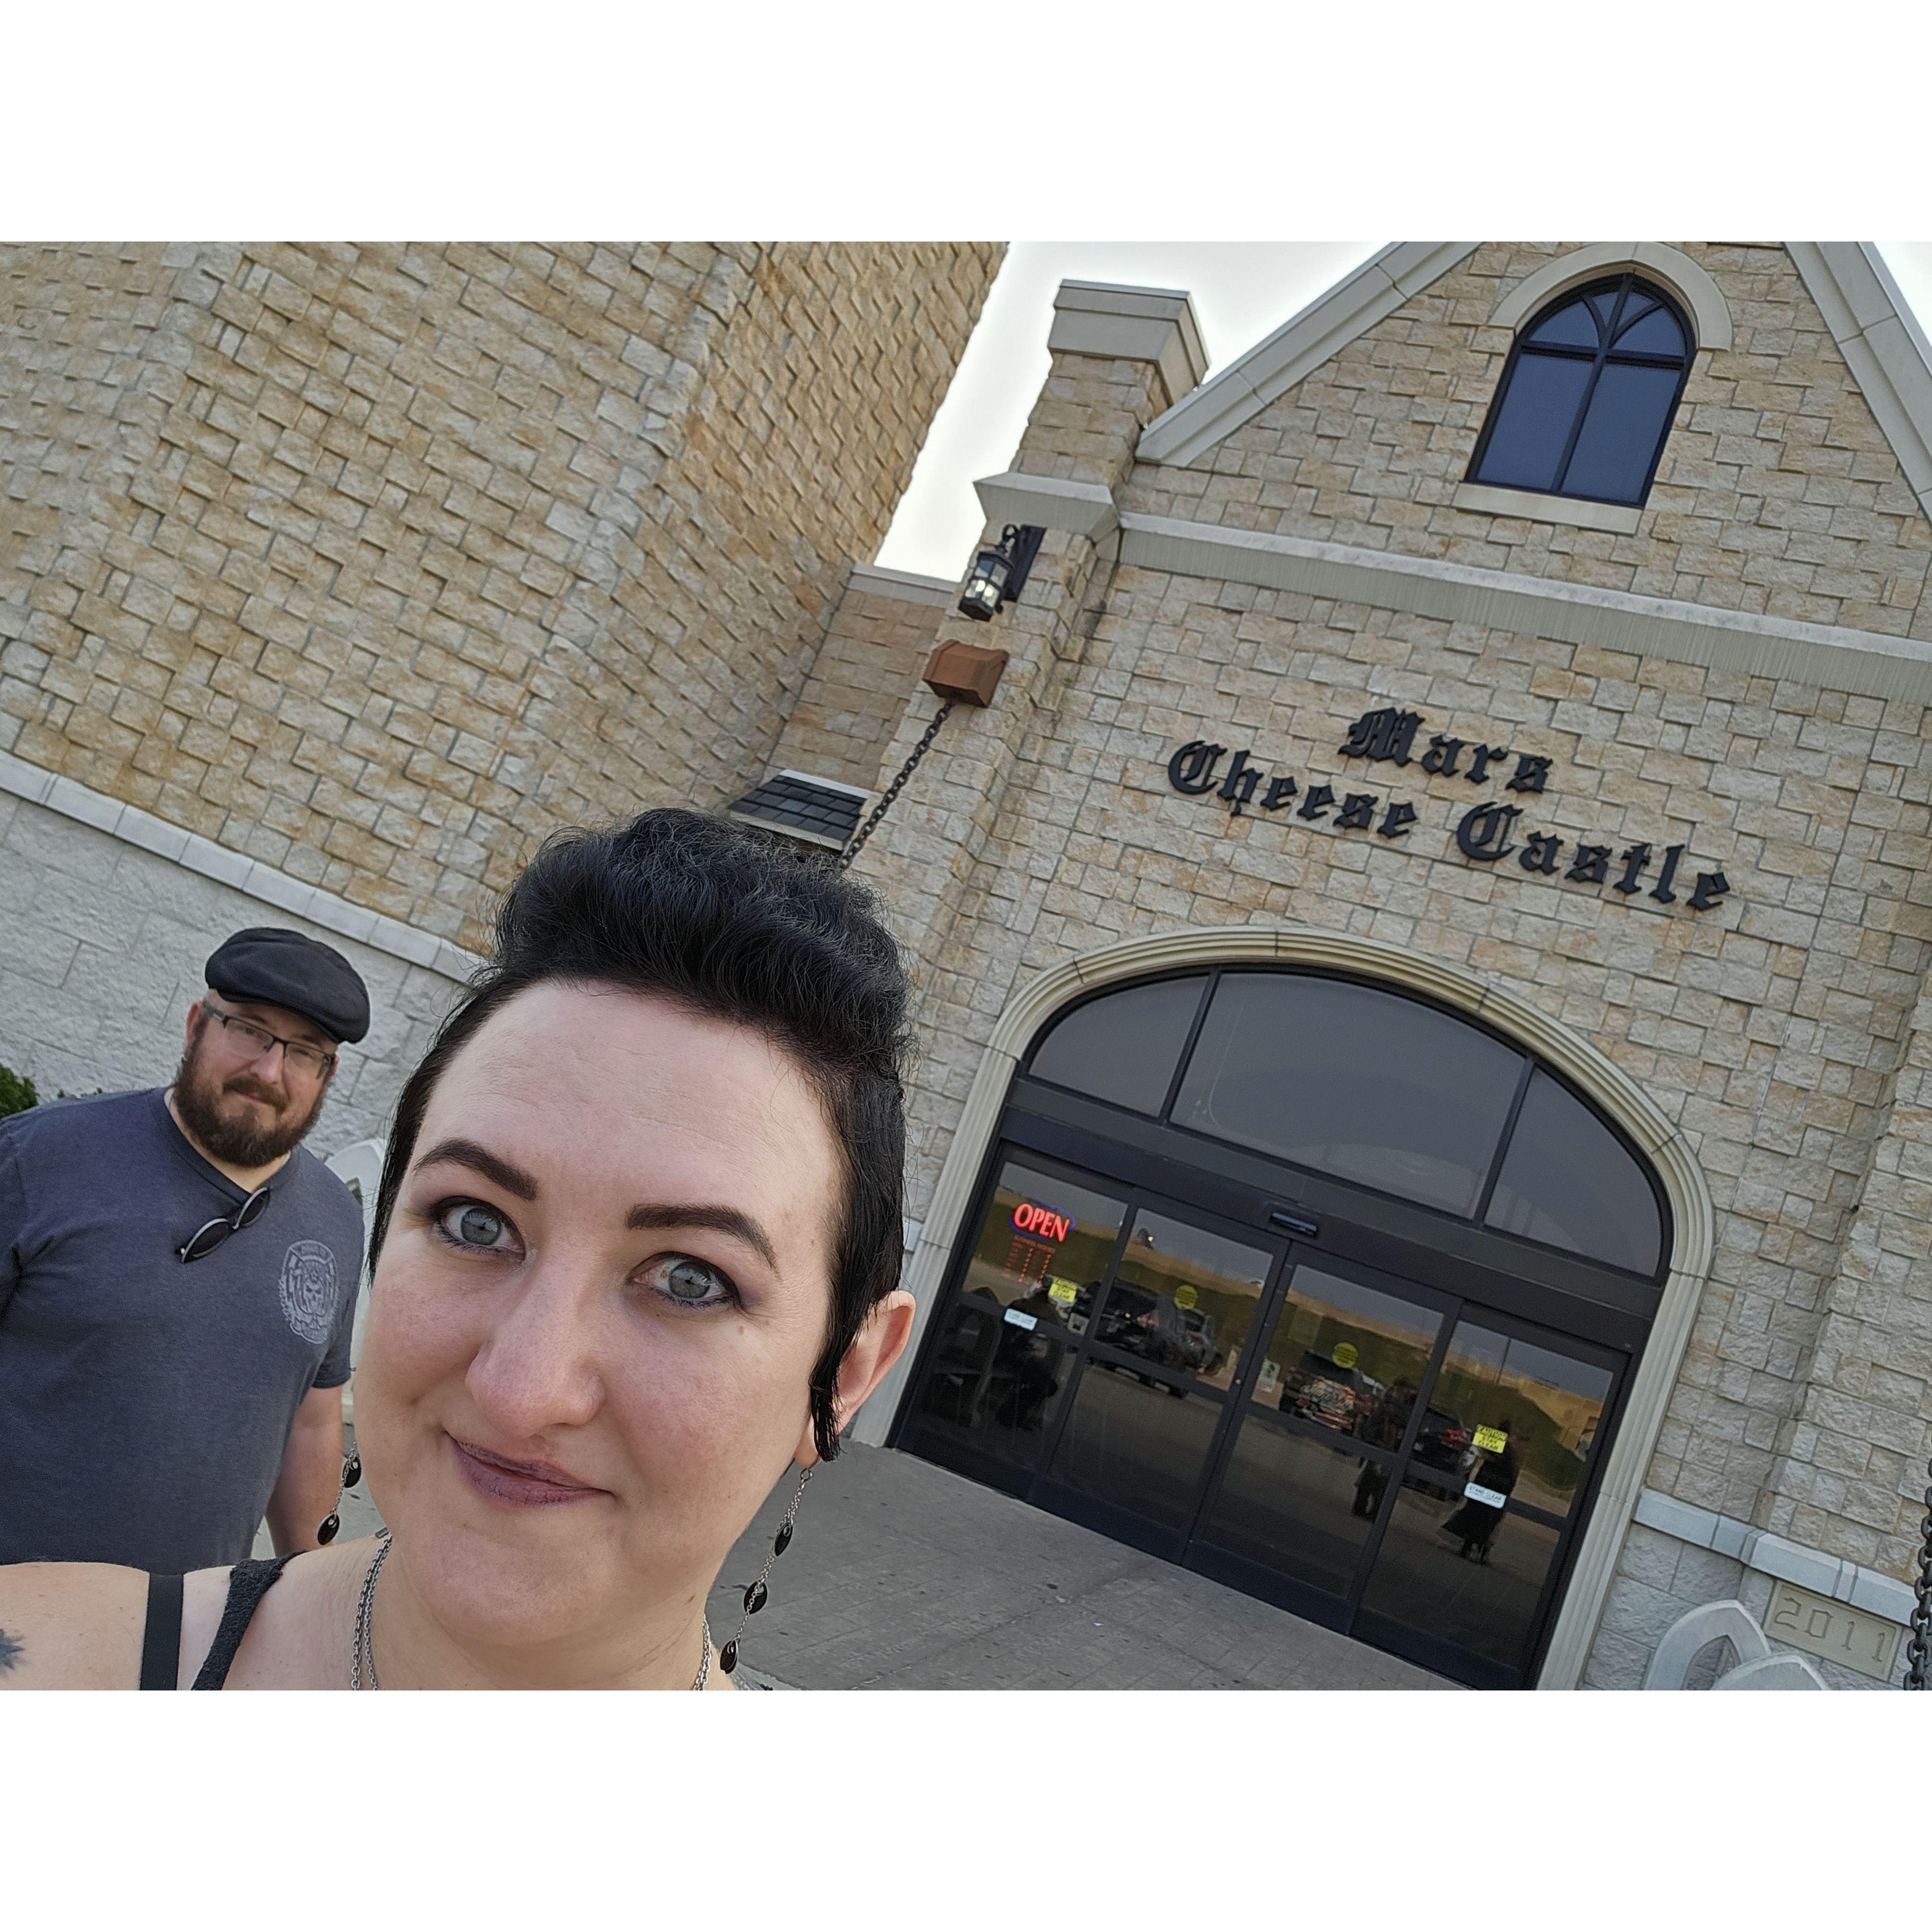 The perfect way to refuel after a day of jesters and jousting at the RenFaire - The Mars Cheese Castle! Lauren was quoted as saying, "Stop talking, you had me at Cheese Castle"